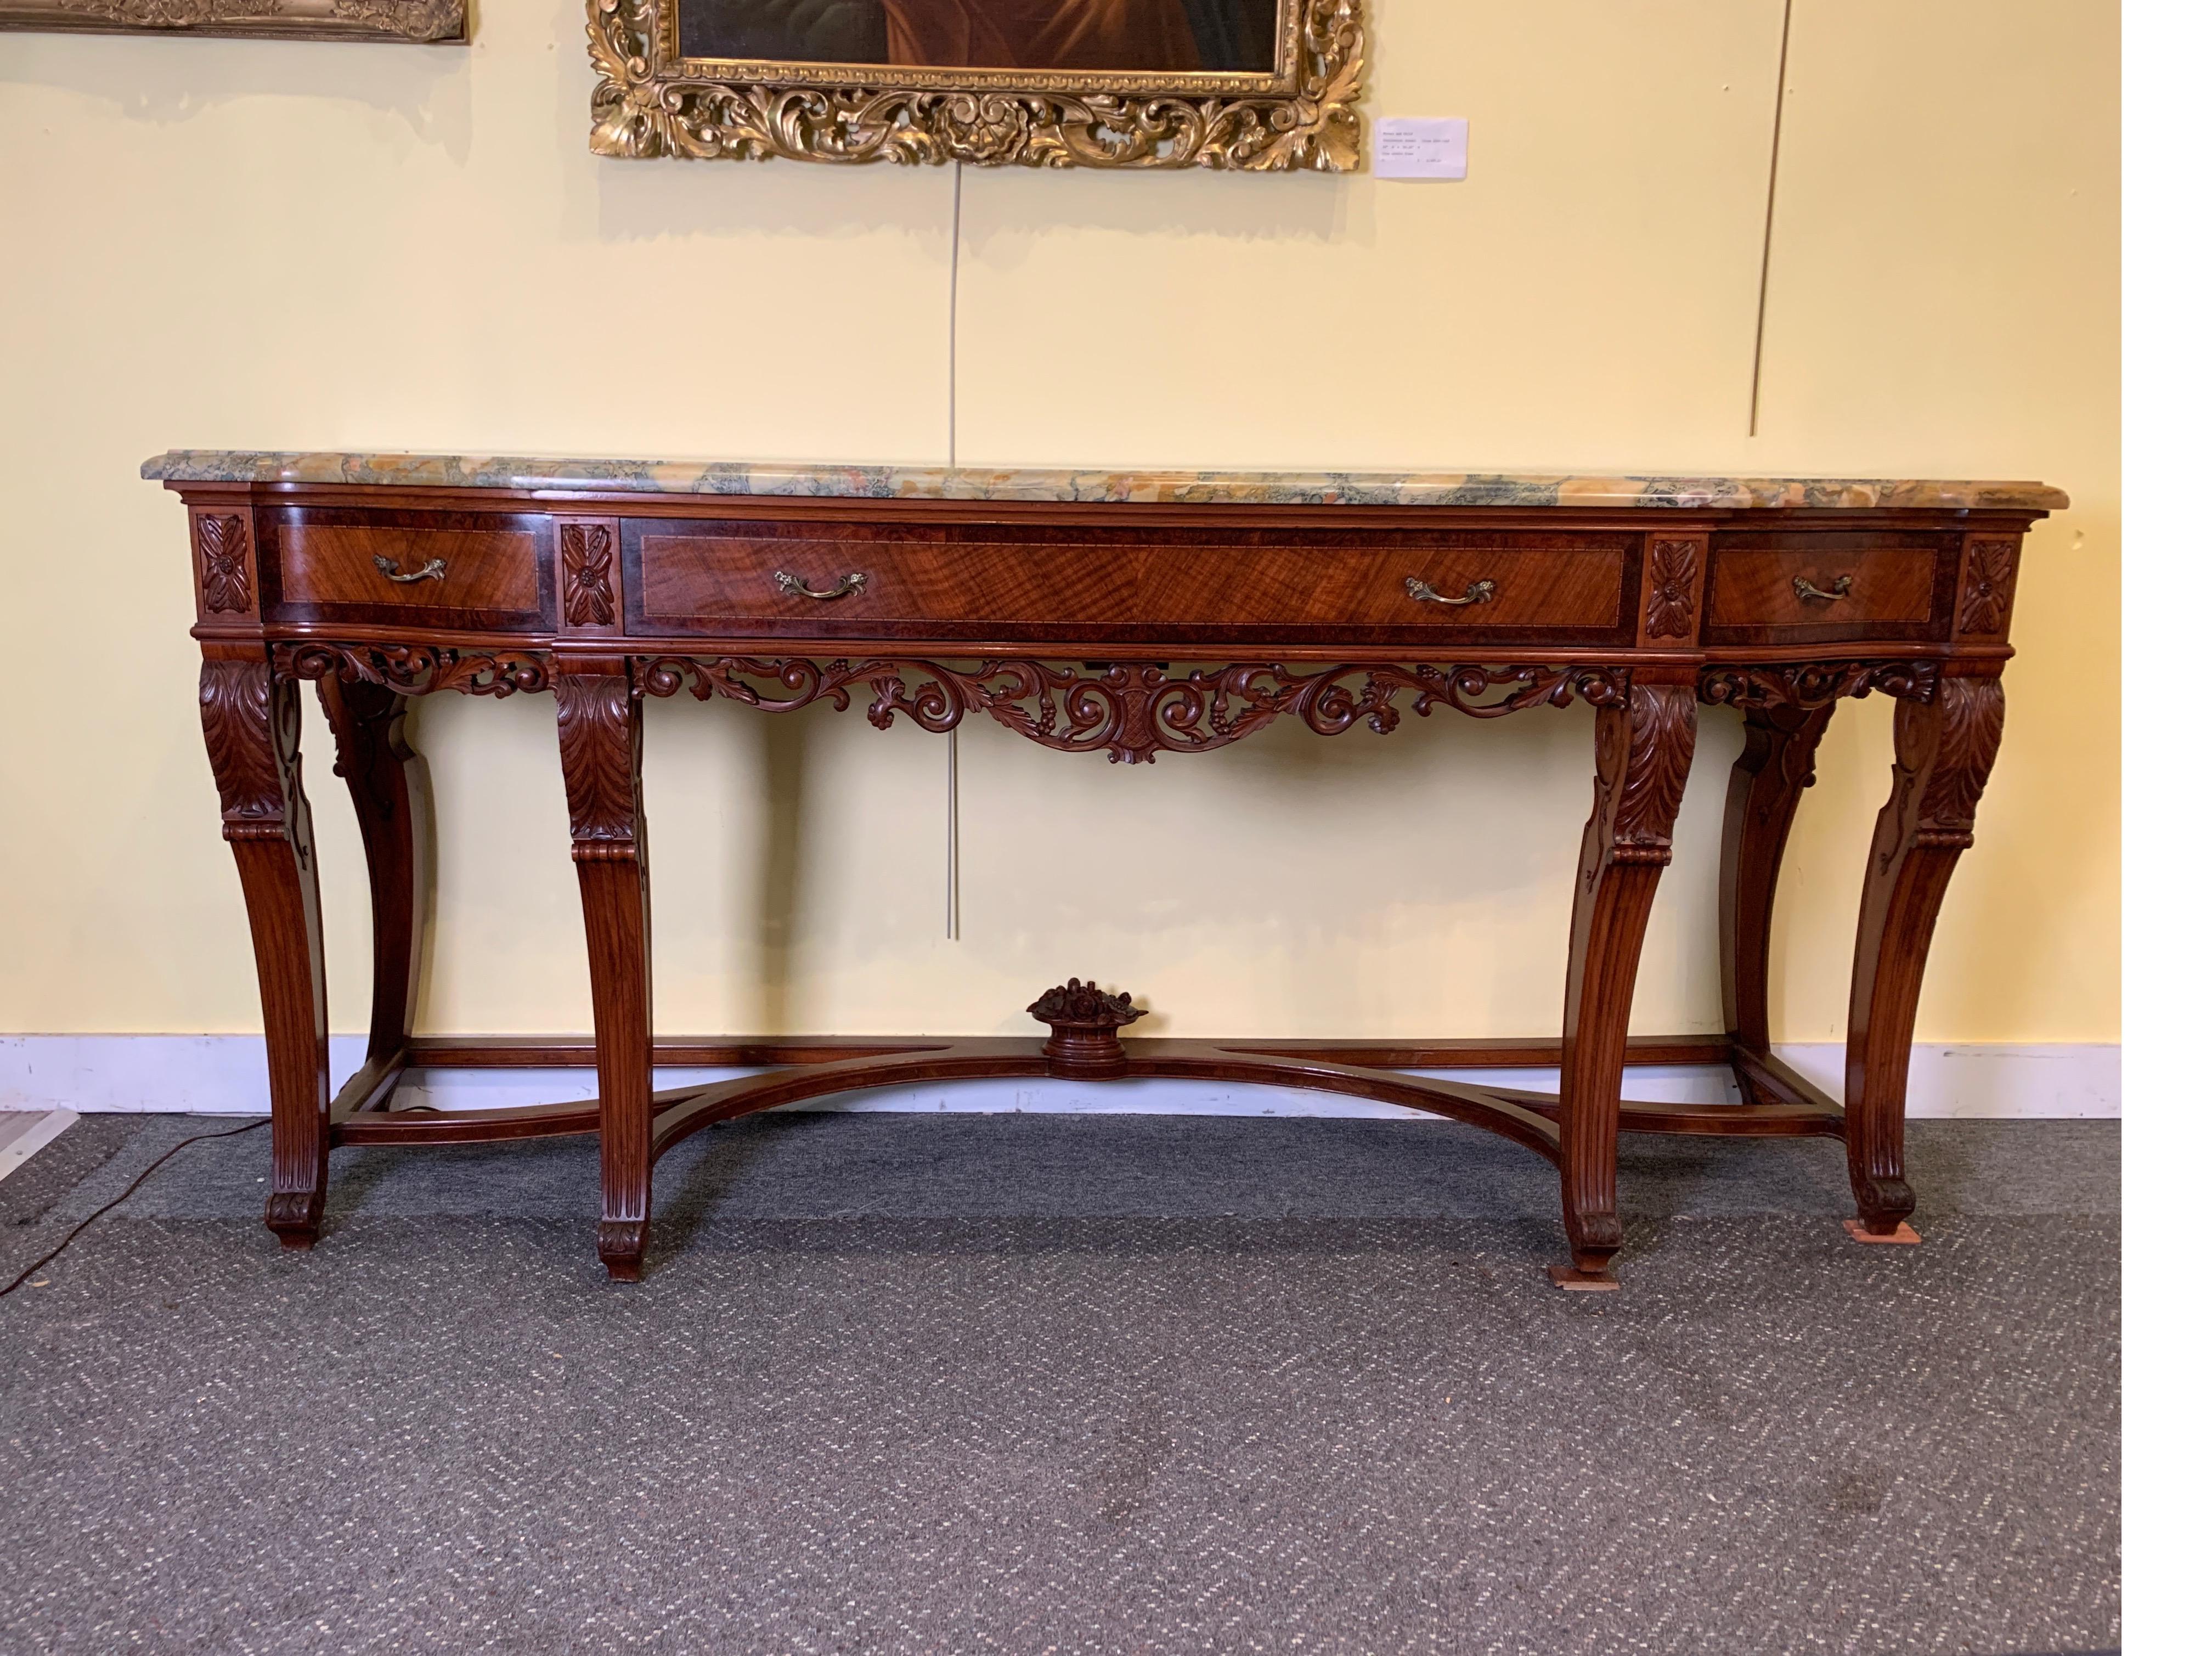 Continental carved walnut and inlaid marble-top console/sideboard, intricately carved solid walnut apron with shapely stretcher base with a central carved basket with finial, circa 1900
The console supported by six legs with acanthus leaves.